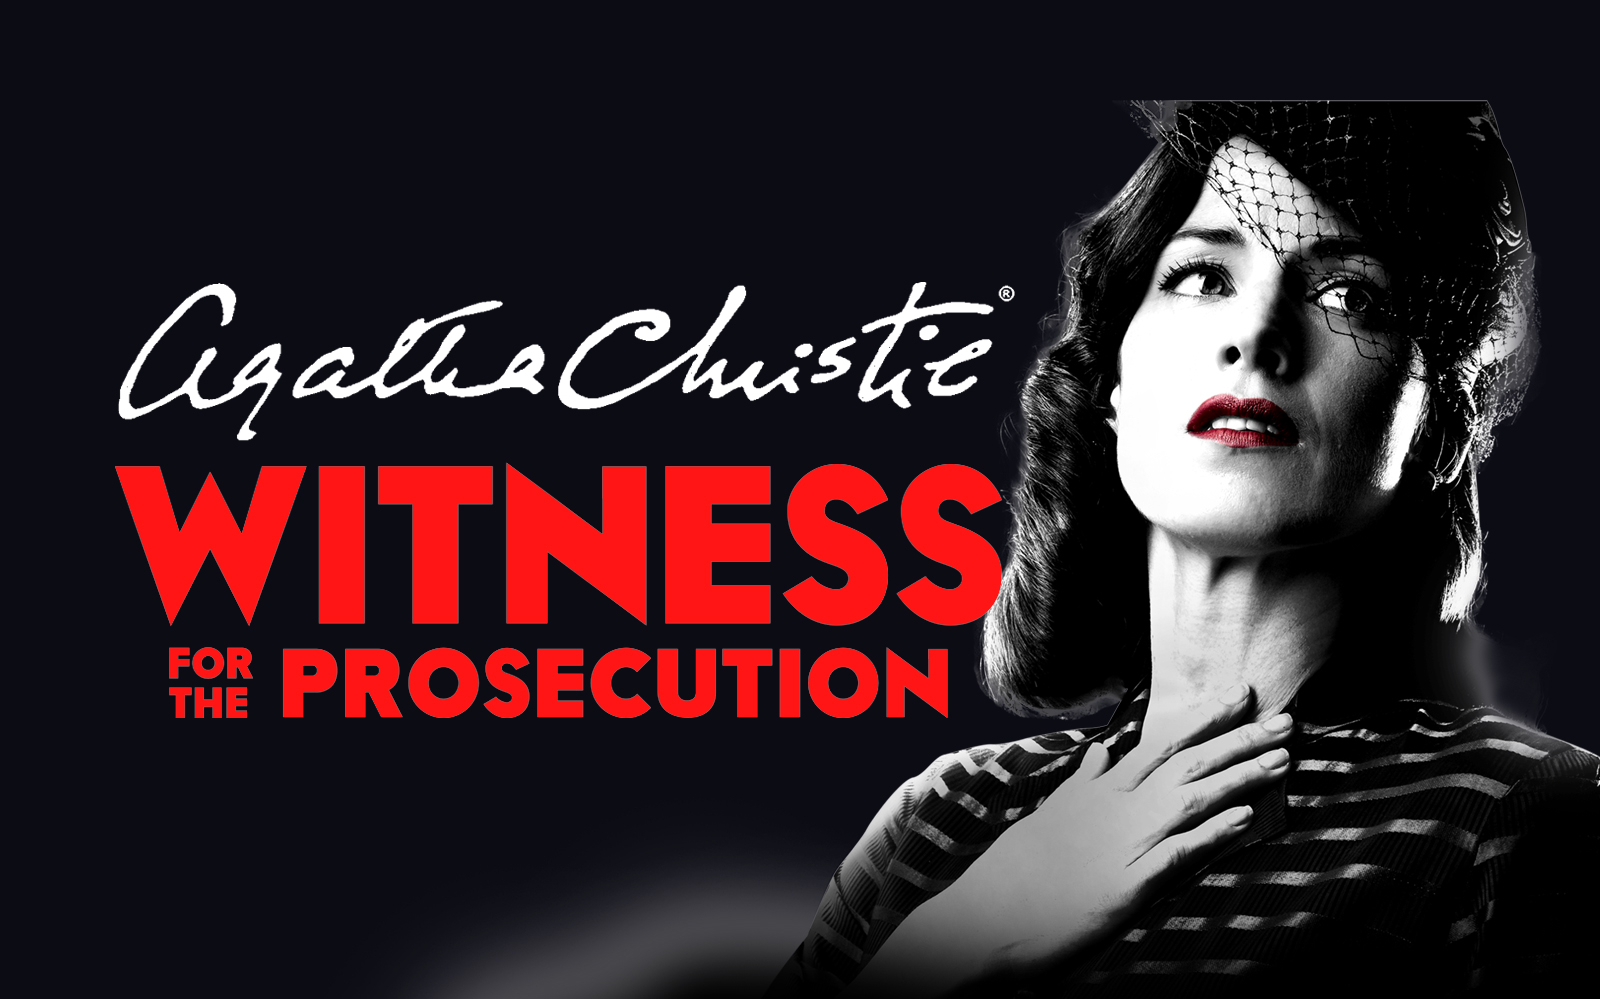 Image of Witness for the Prosecution